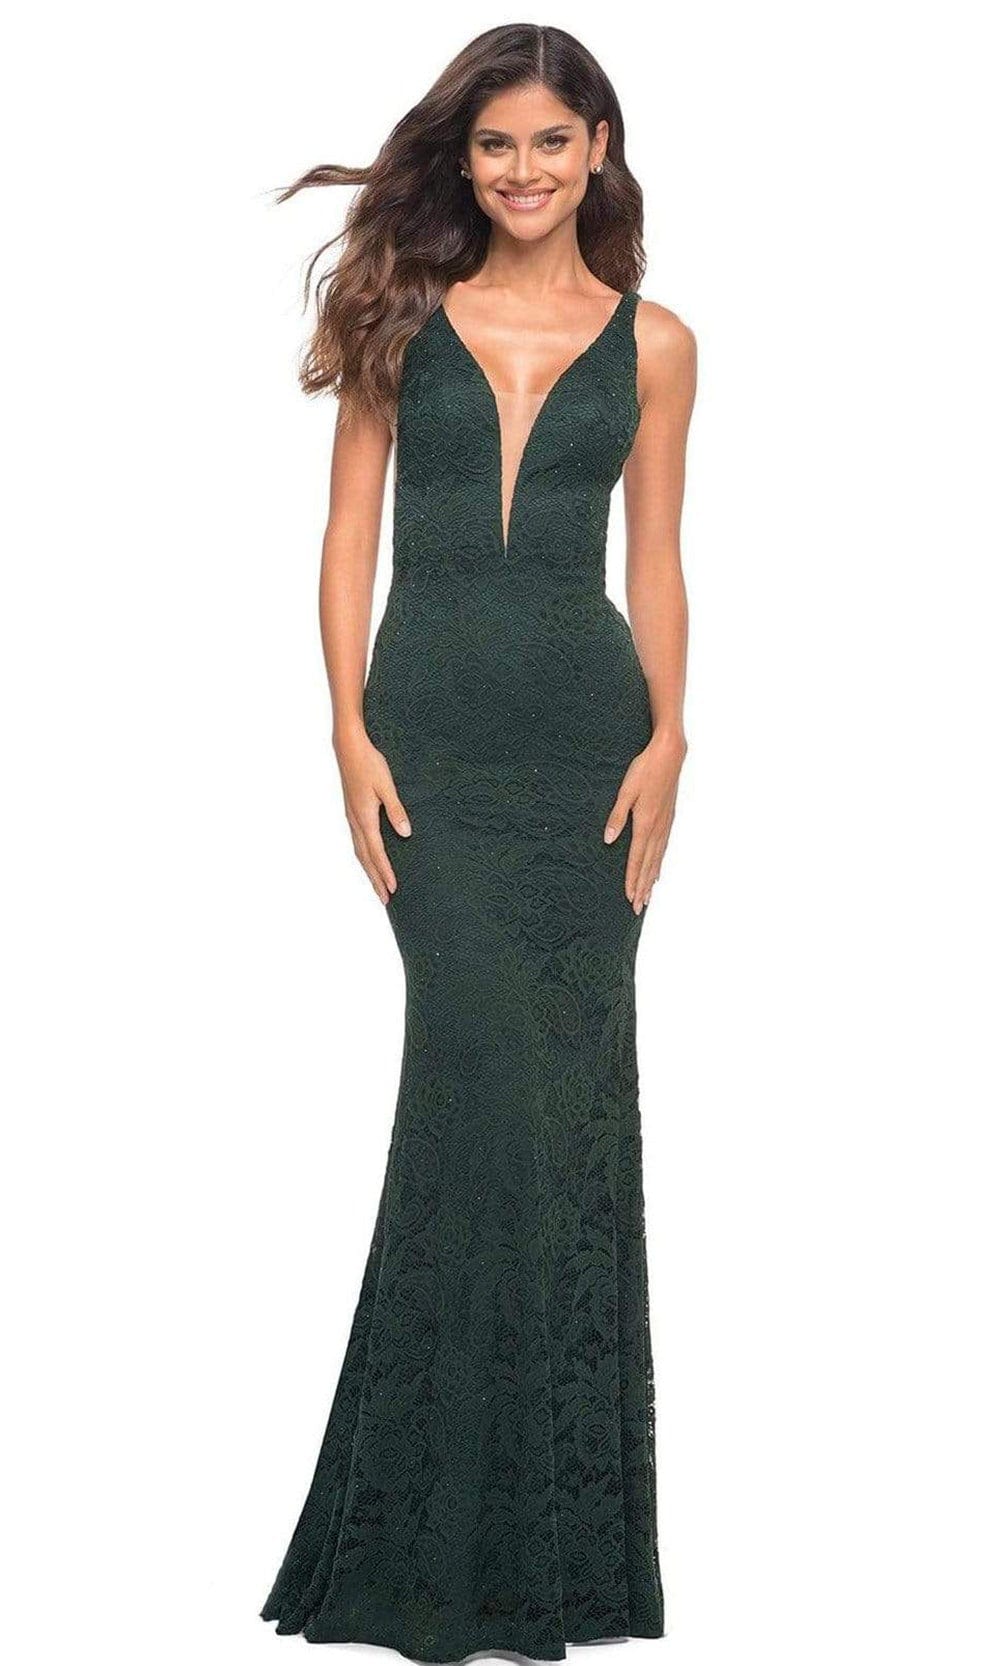 Image of La Femme - 29732 Plunging Beaded Lace Gown